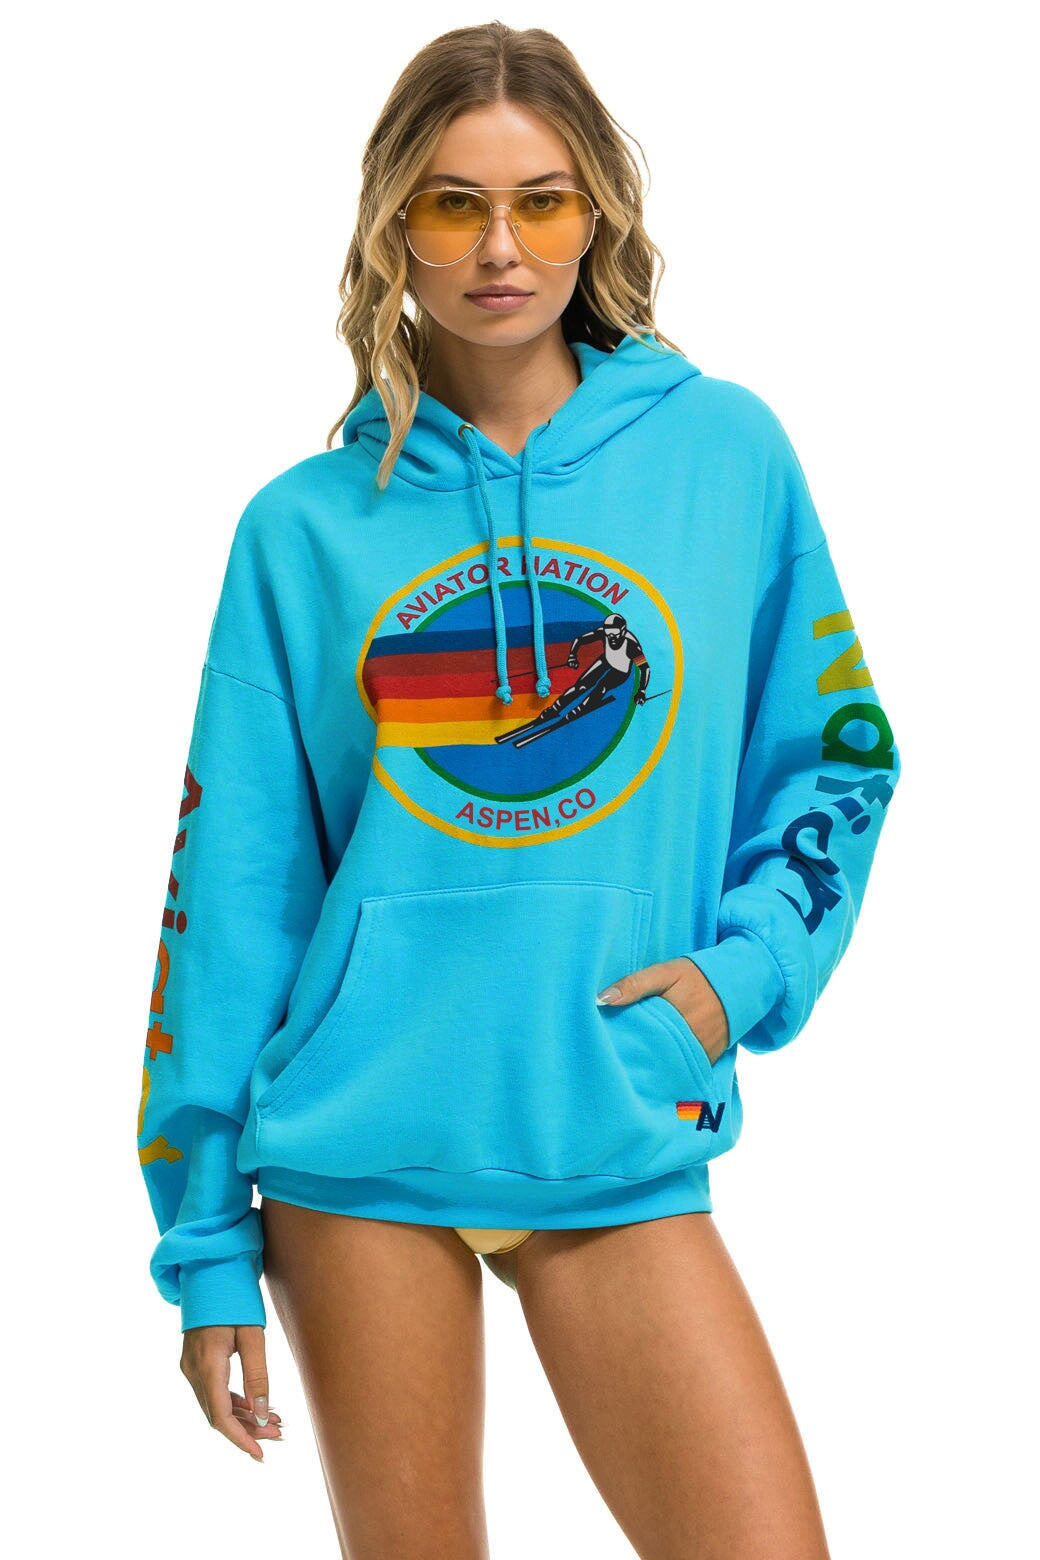 AVIATOR NATION ASPEN RELAXED PULLOVER HOODIE - NEON BLUE Hoodie Aviator Nation 